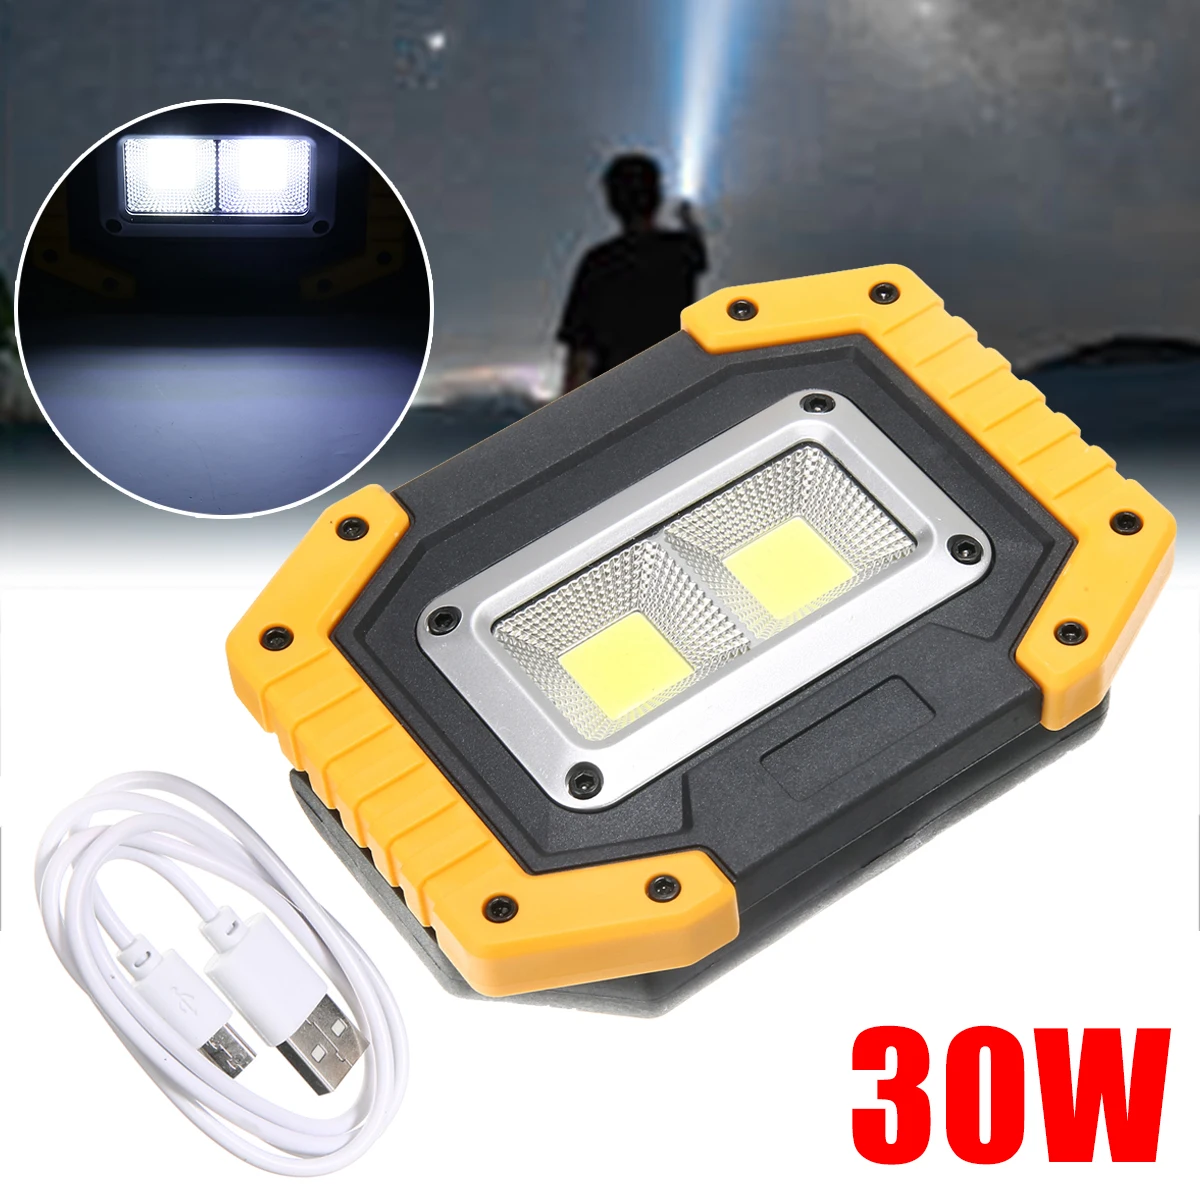 

Mayitr 2 COB 30W 800LM Portable Rechargeable IP65 LED Flood Light Spot Lamp Outdoor Working Emergency Portable Spotlights